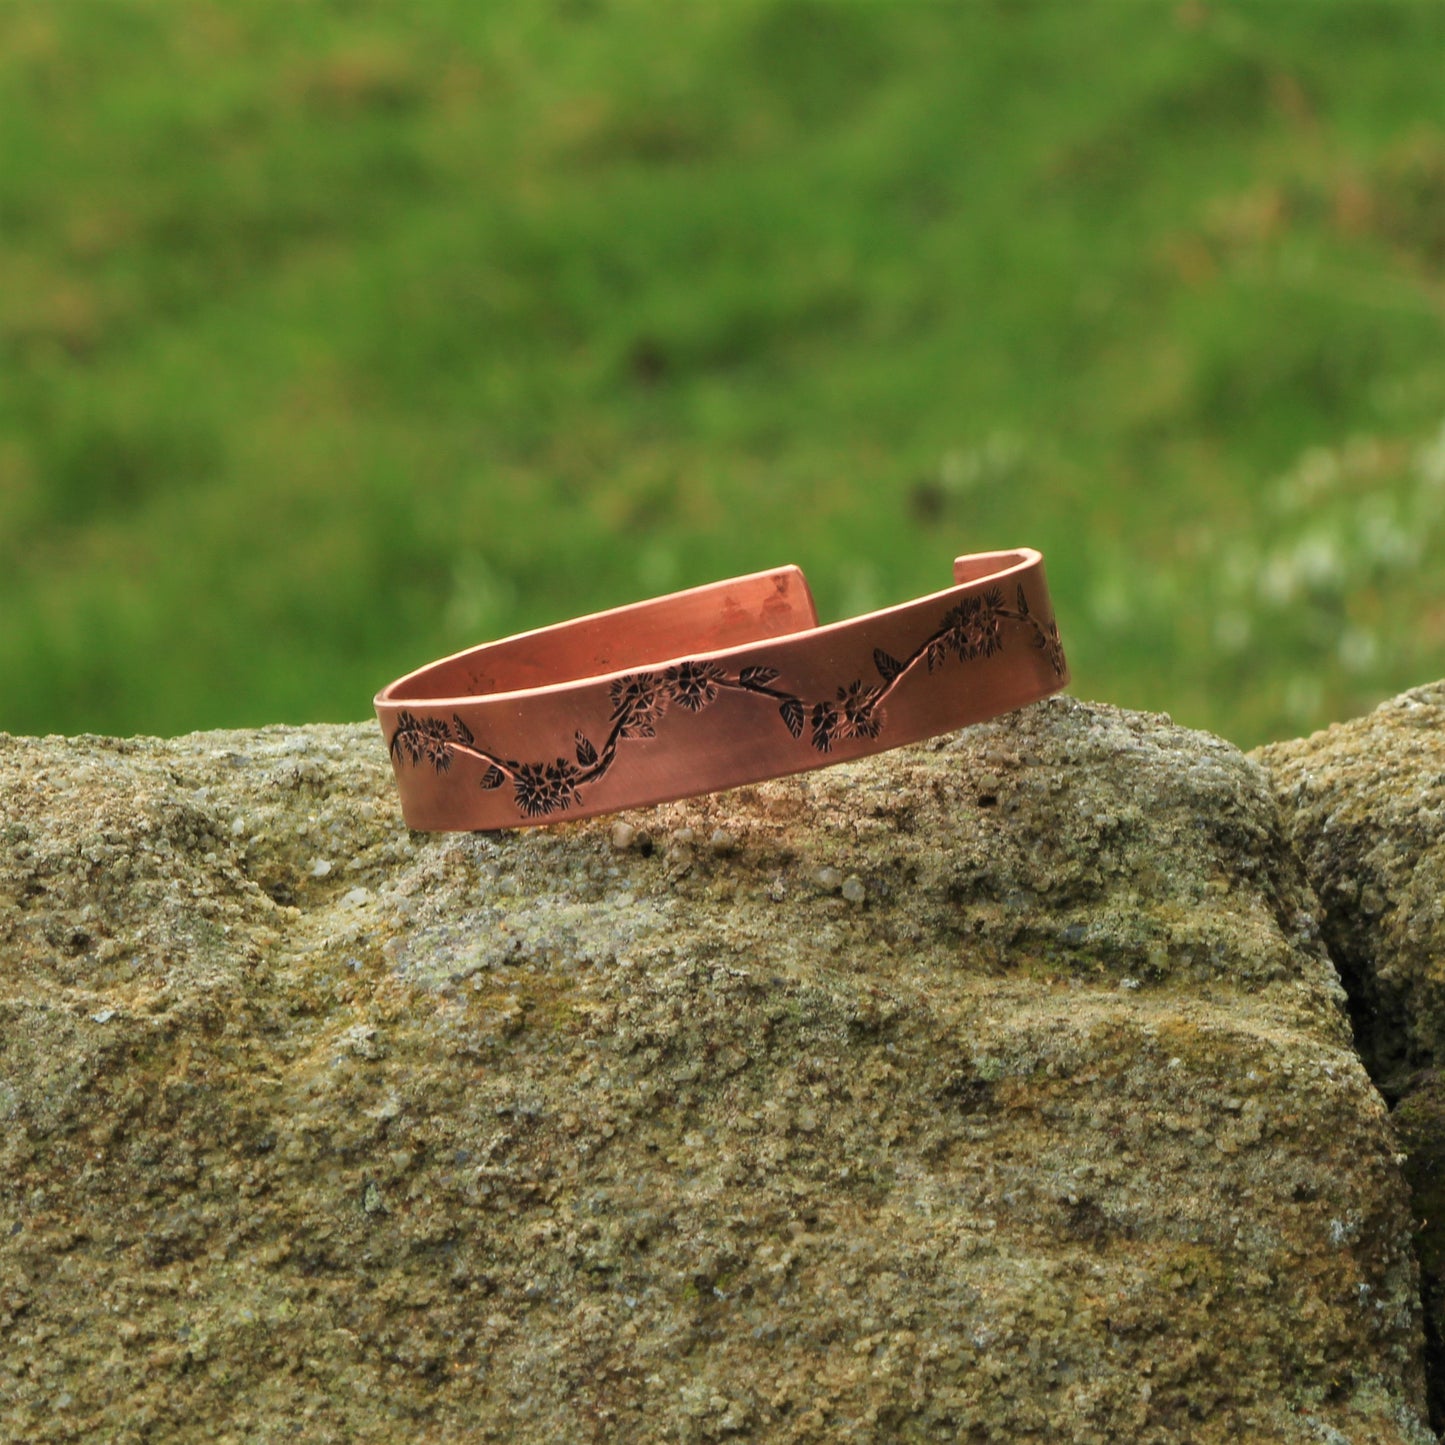 wide copper bangle with pretty floral embossed garland design running the length of the bangle. Adjustable ad available in sizes from 6 inches to 9.5 inches